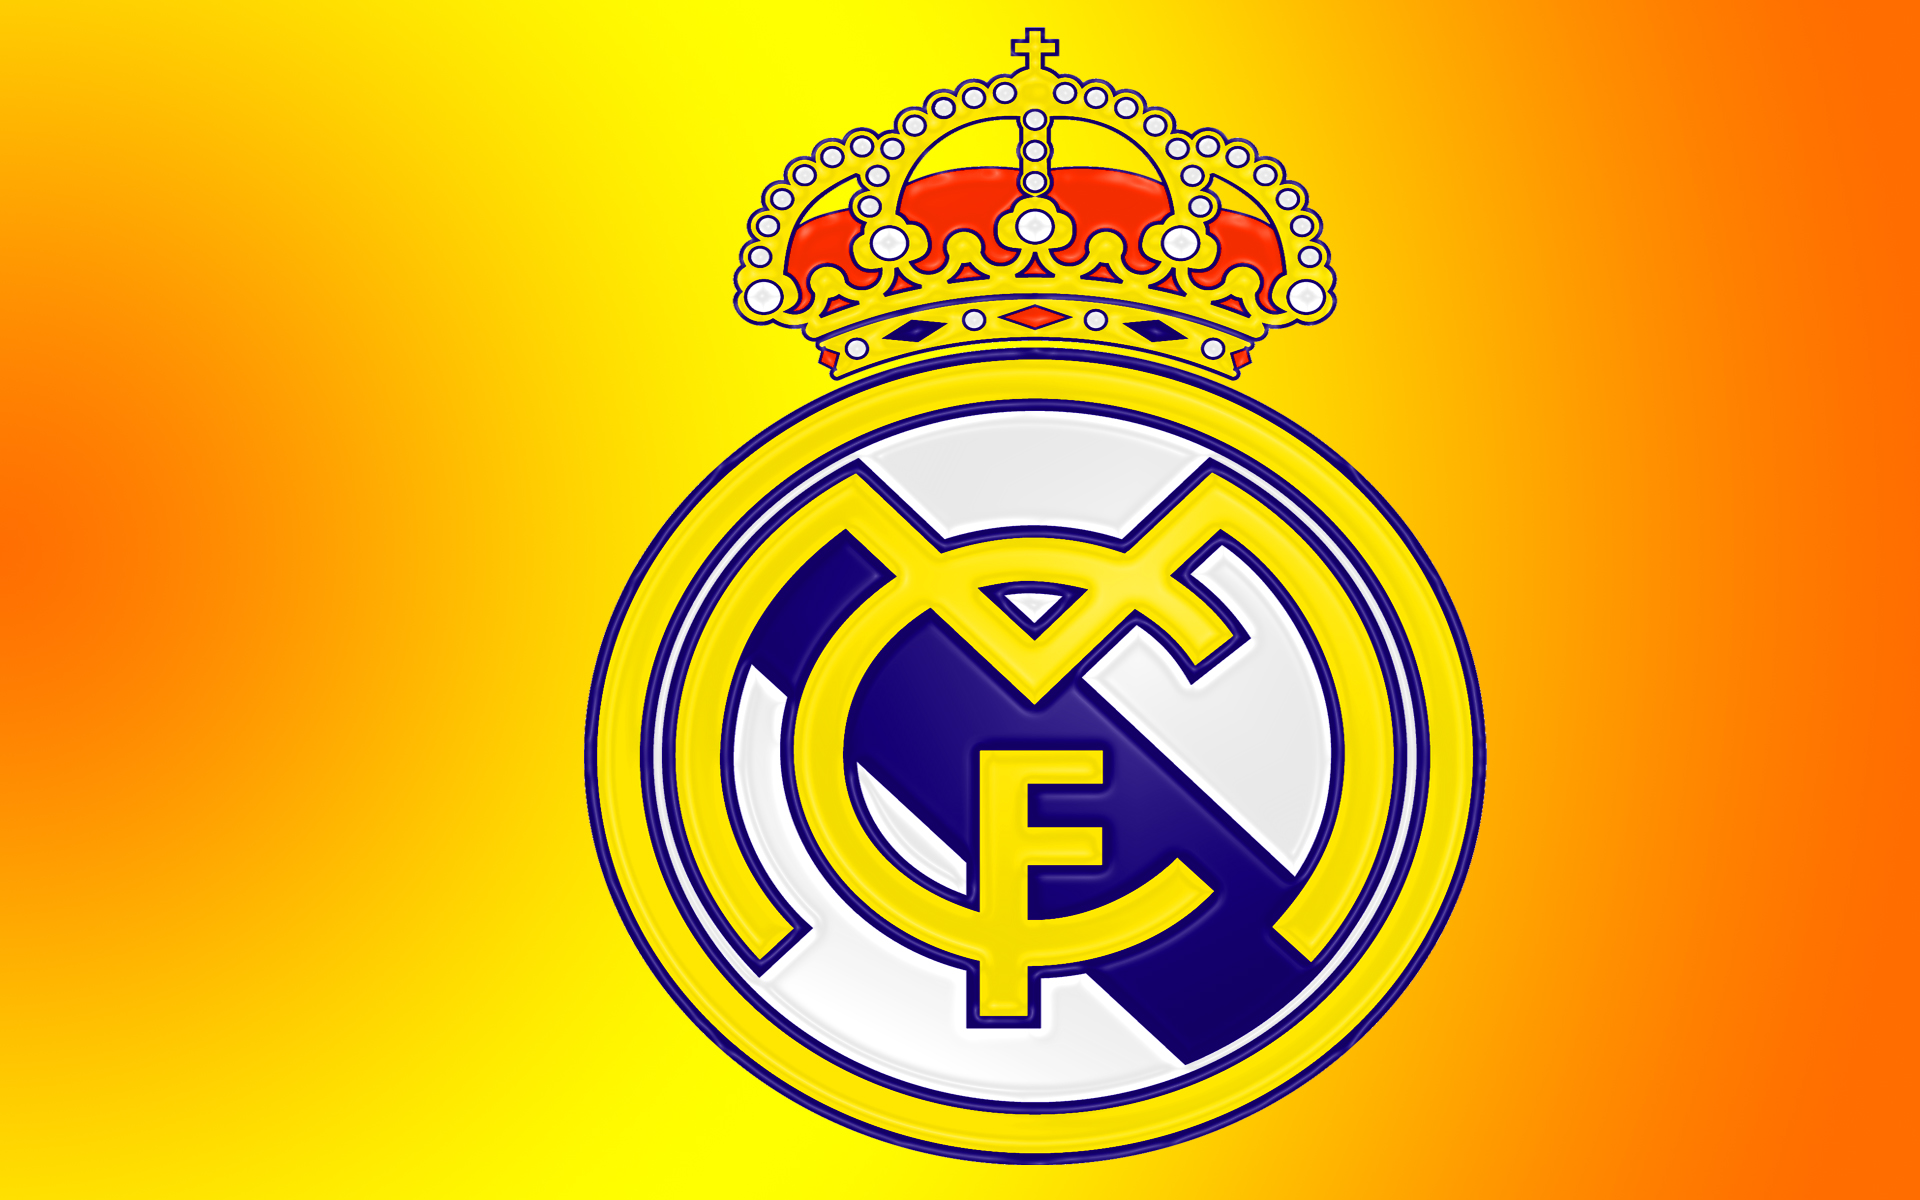  A blue and yellow soccer ball with the Real Madrid logo, which has a crown and the letters M, C, and F, on it.